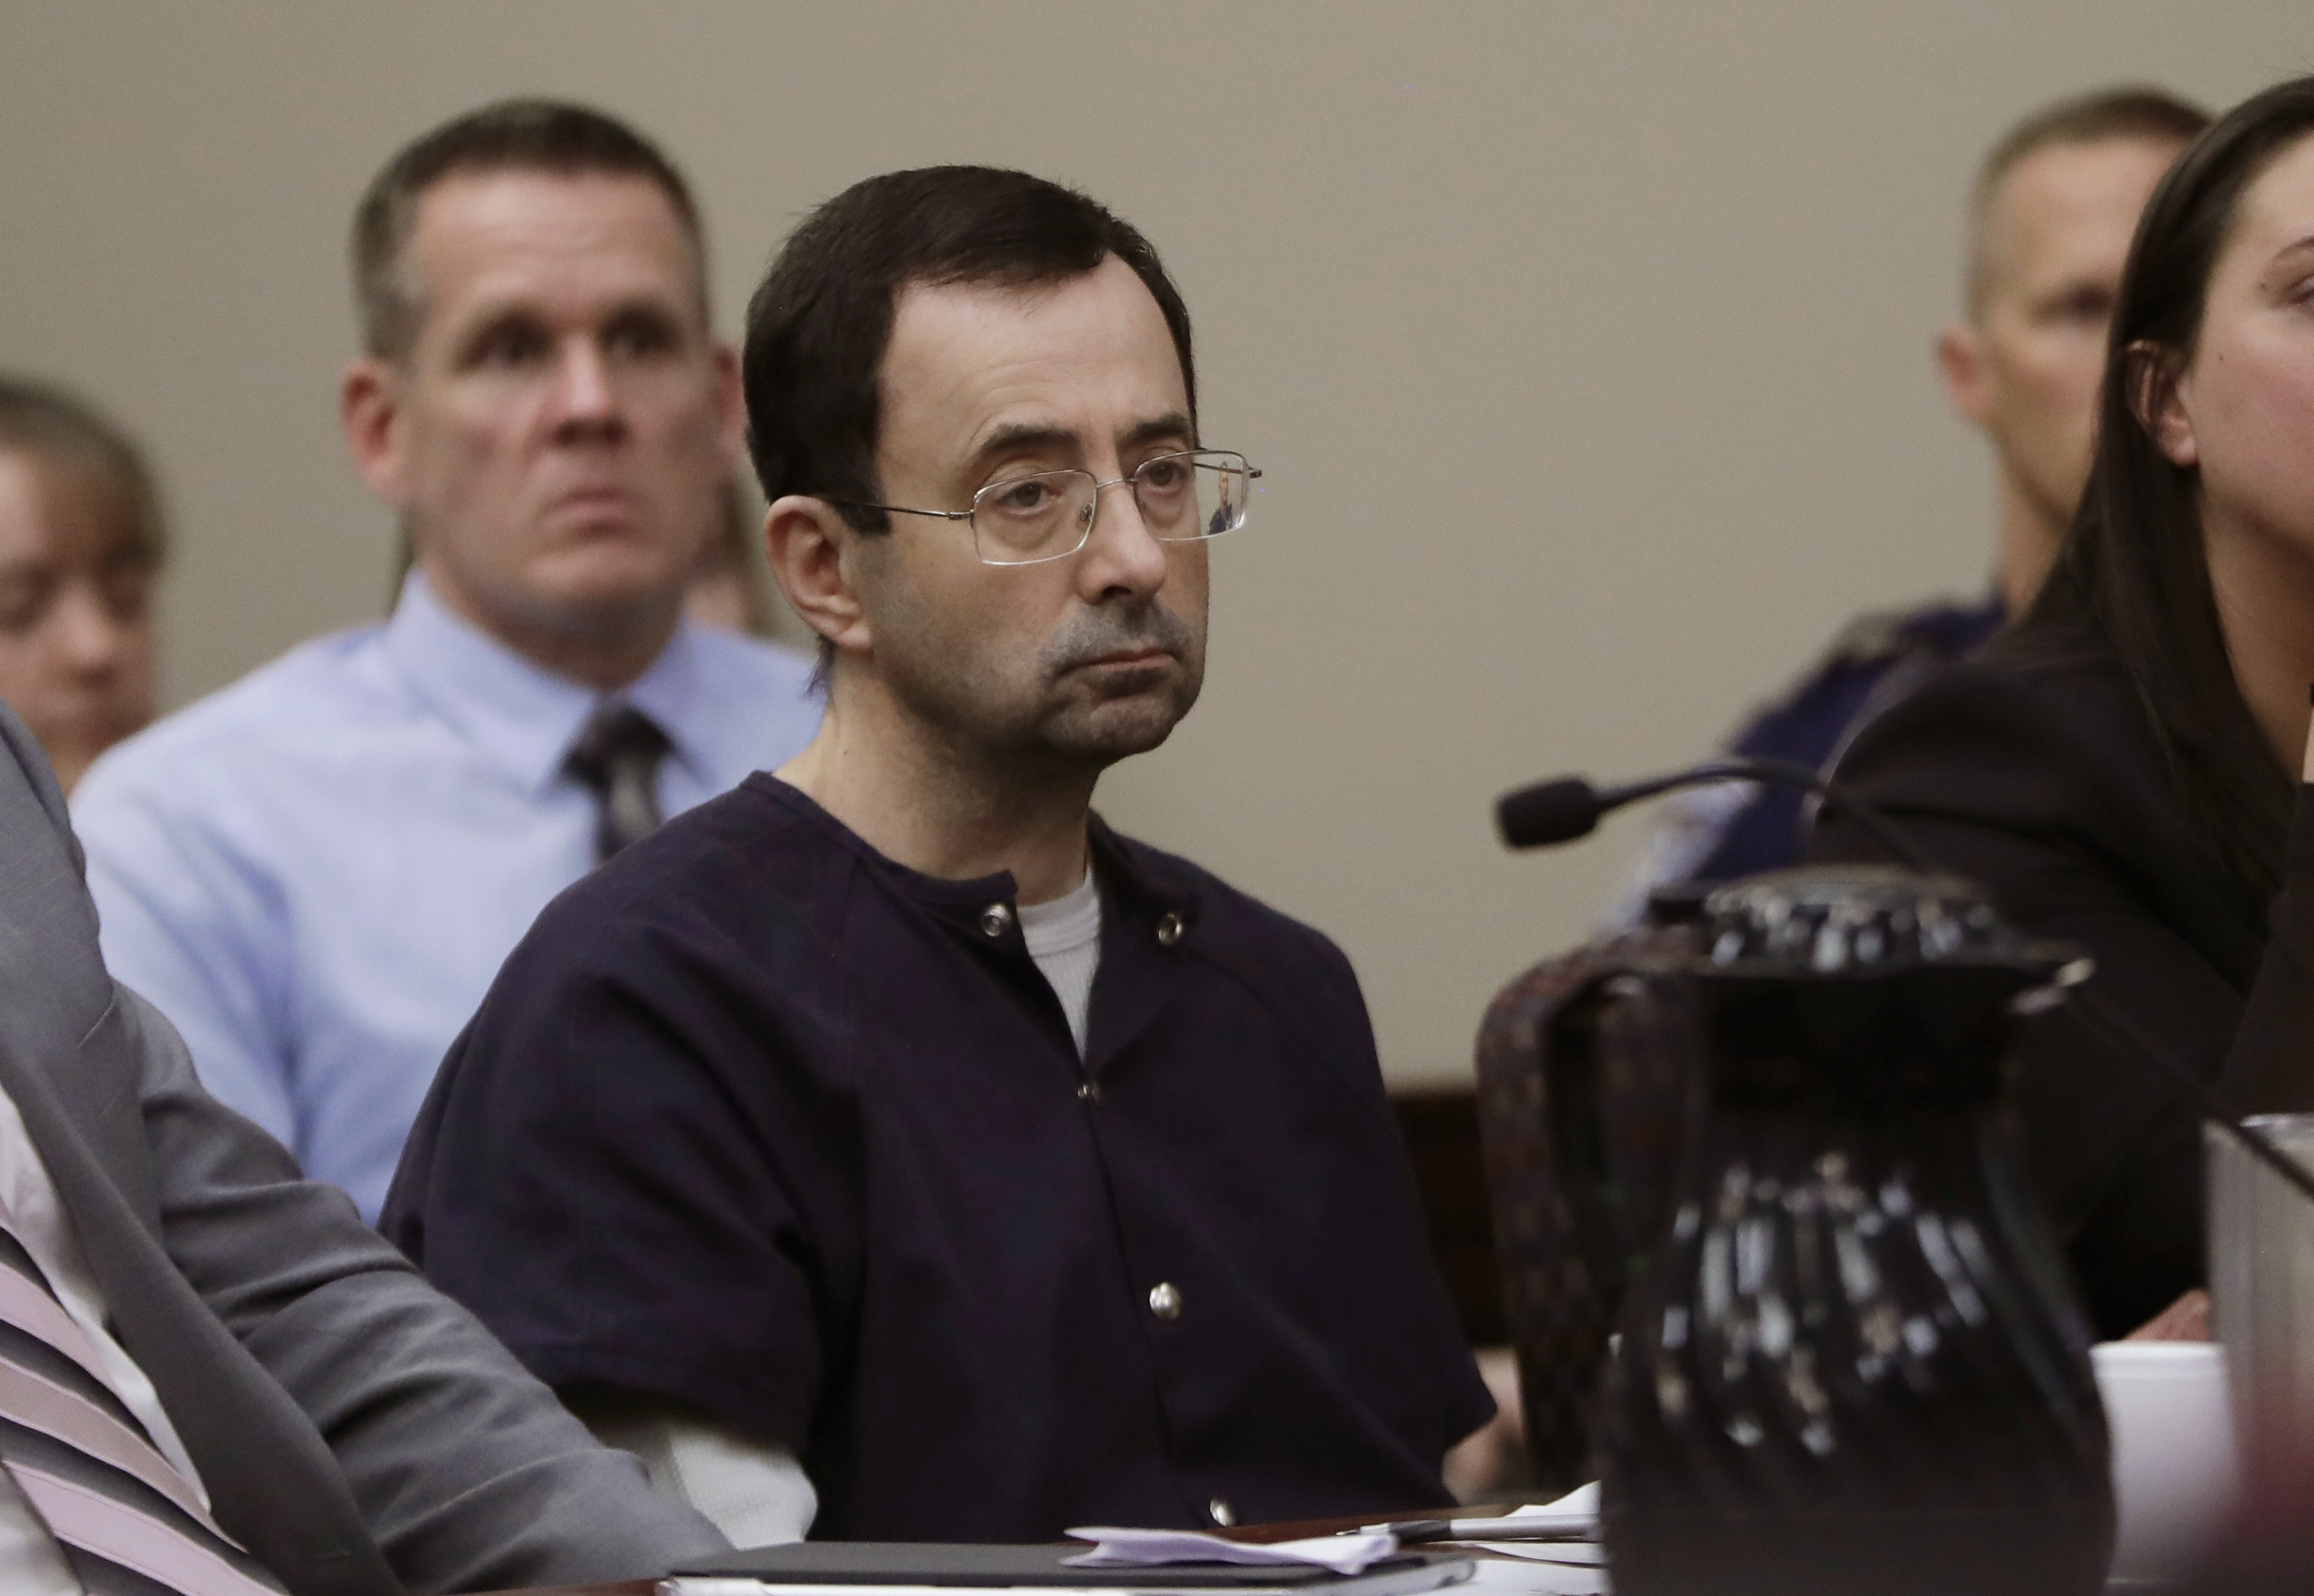 Michigan police department to apologize regarding sports doctor Larry Nassar Chattanooga Times Free Press